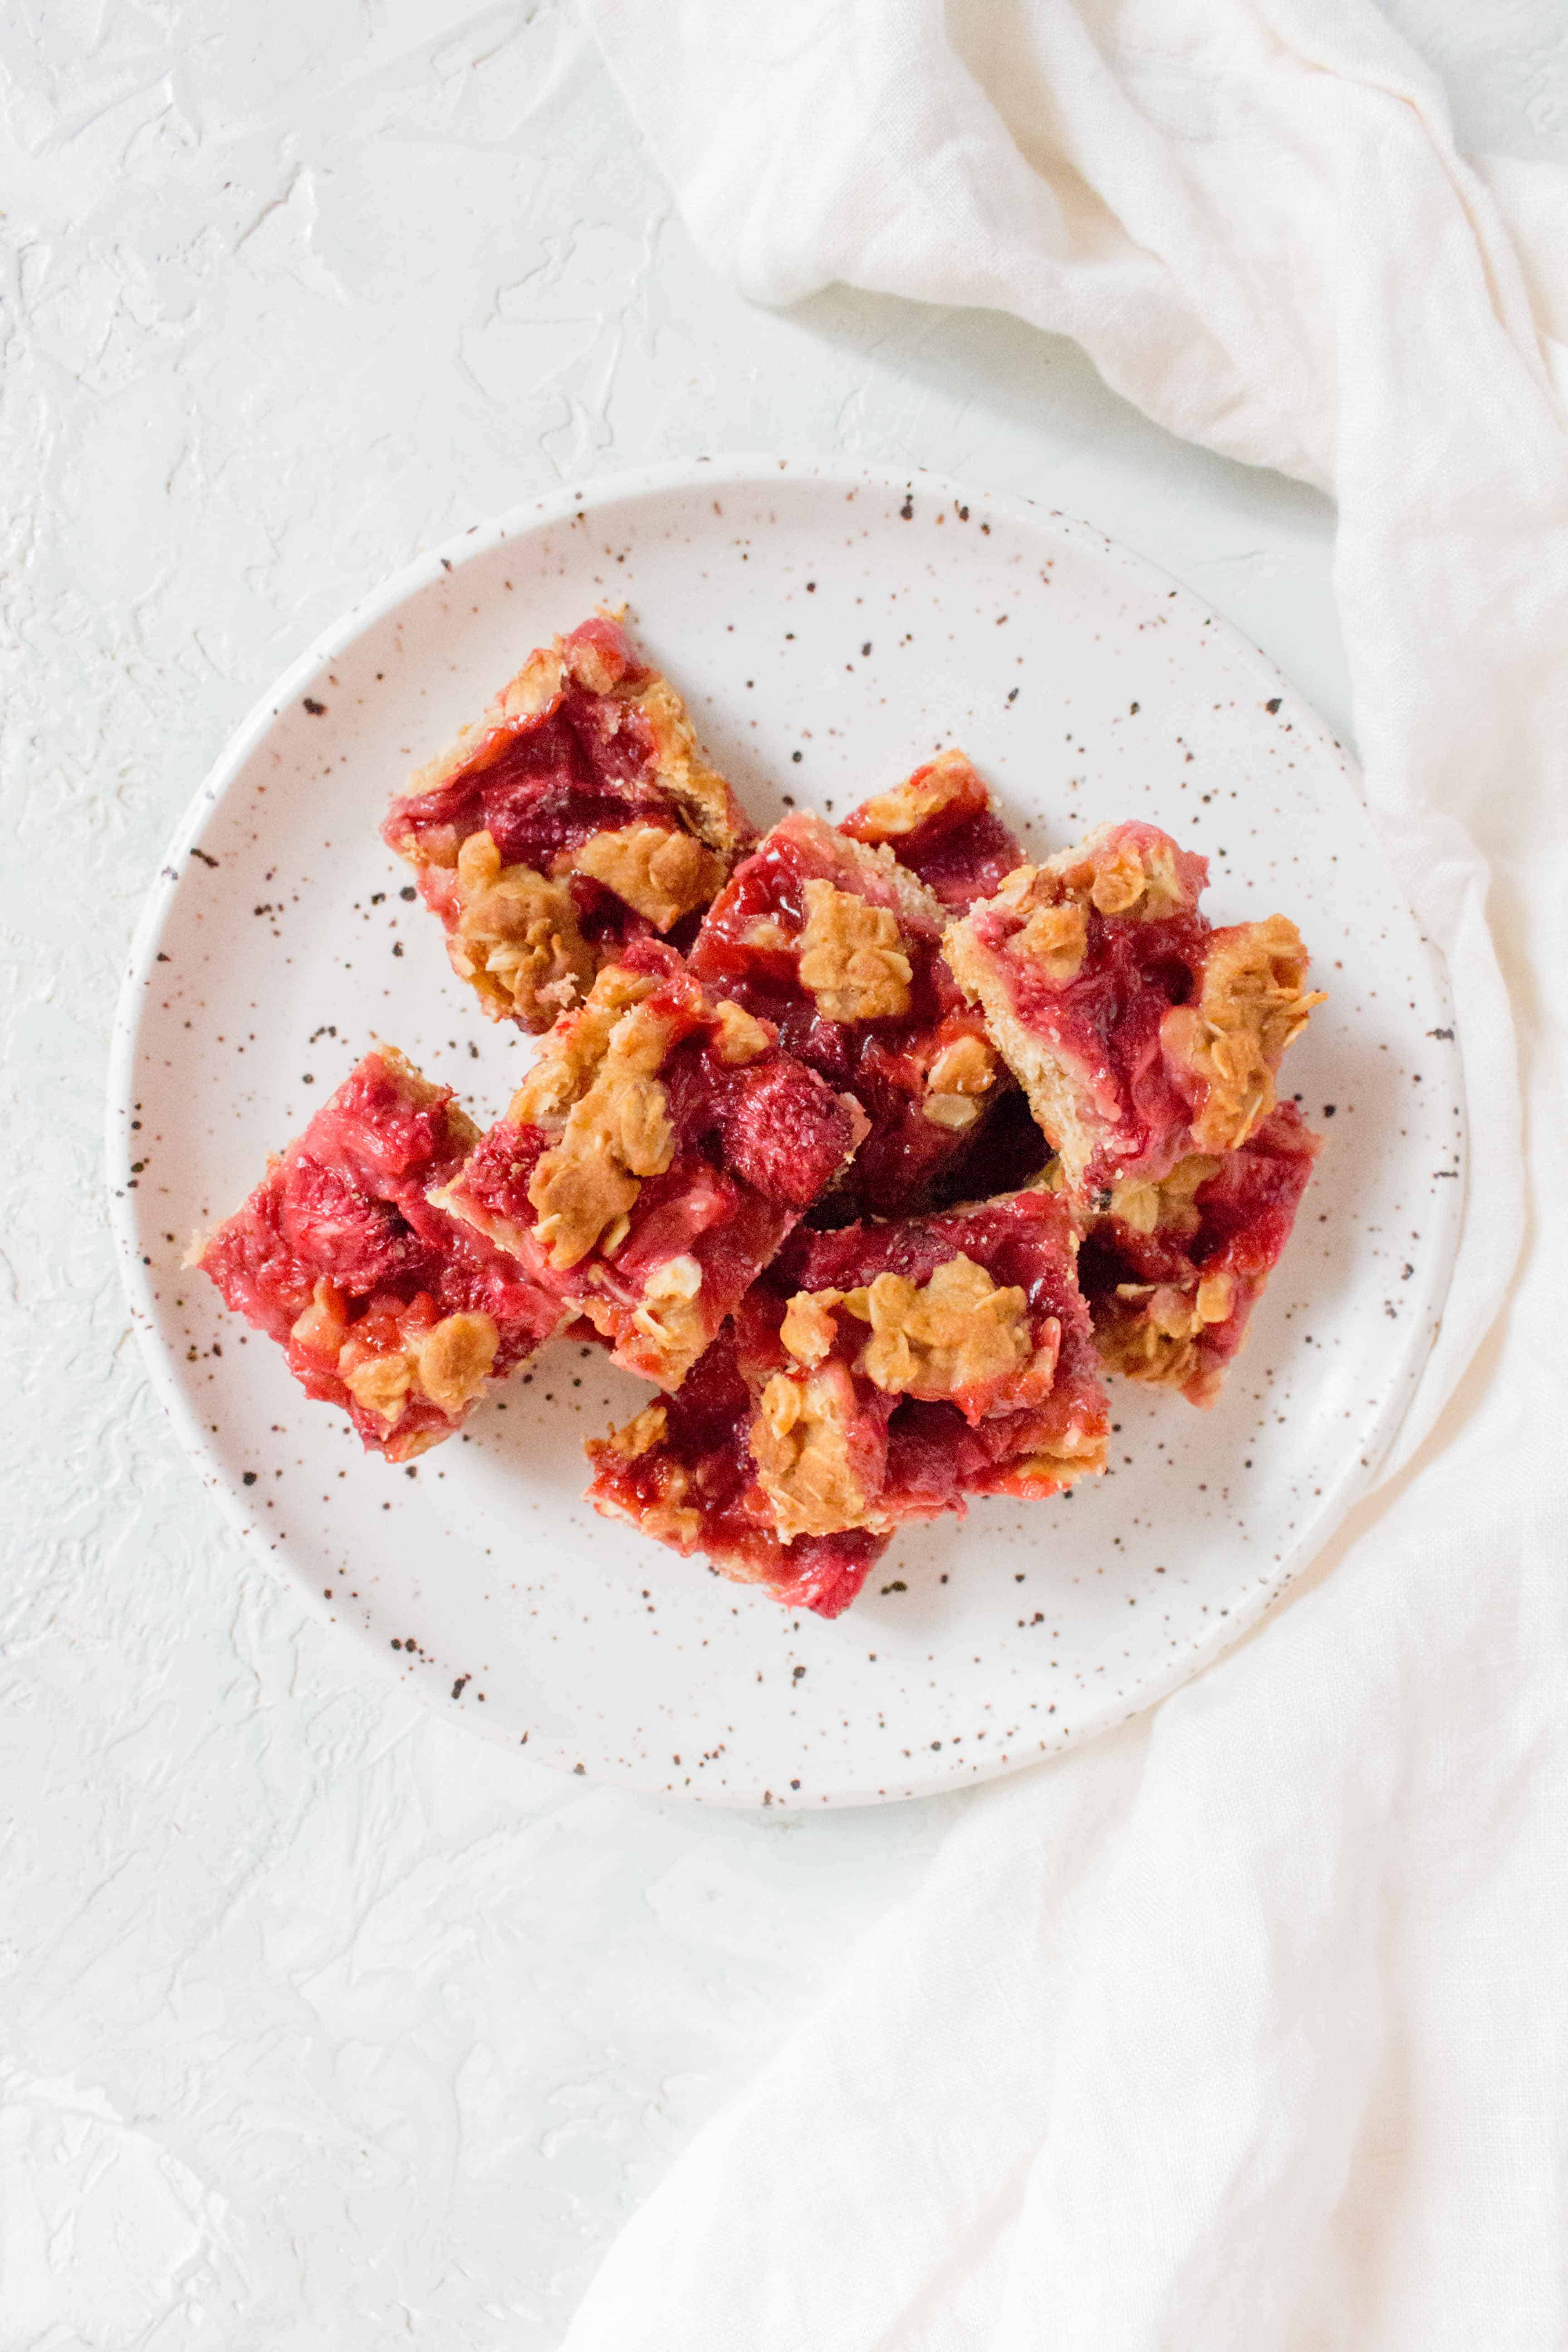 These freezer friendly strawberry bars are the perfect quick snack!